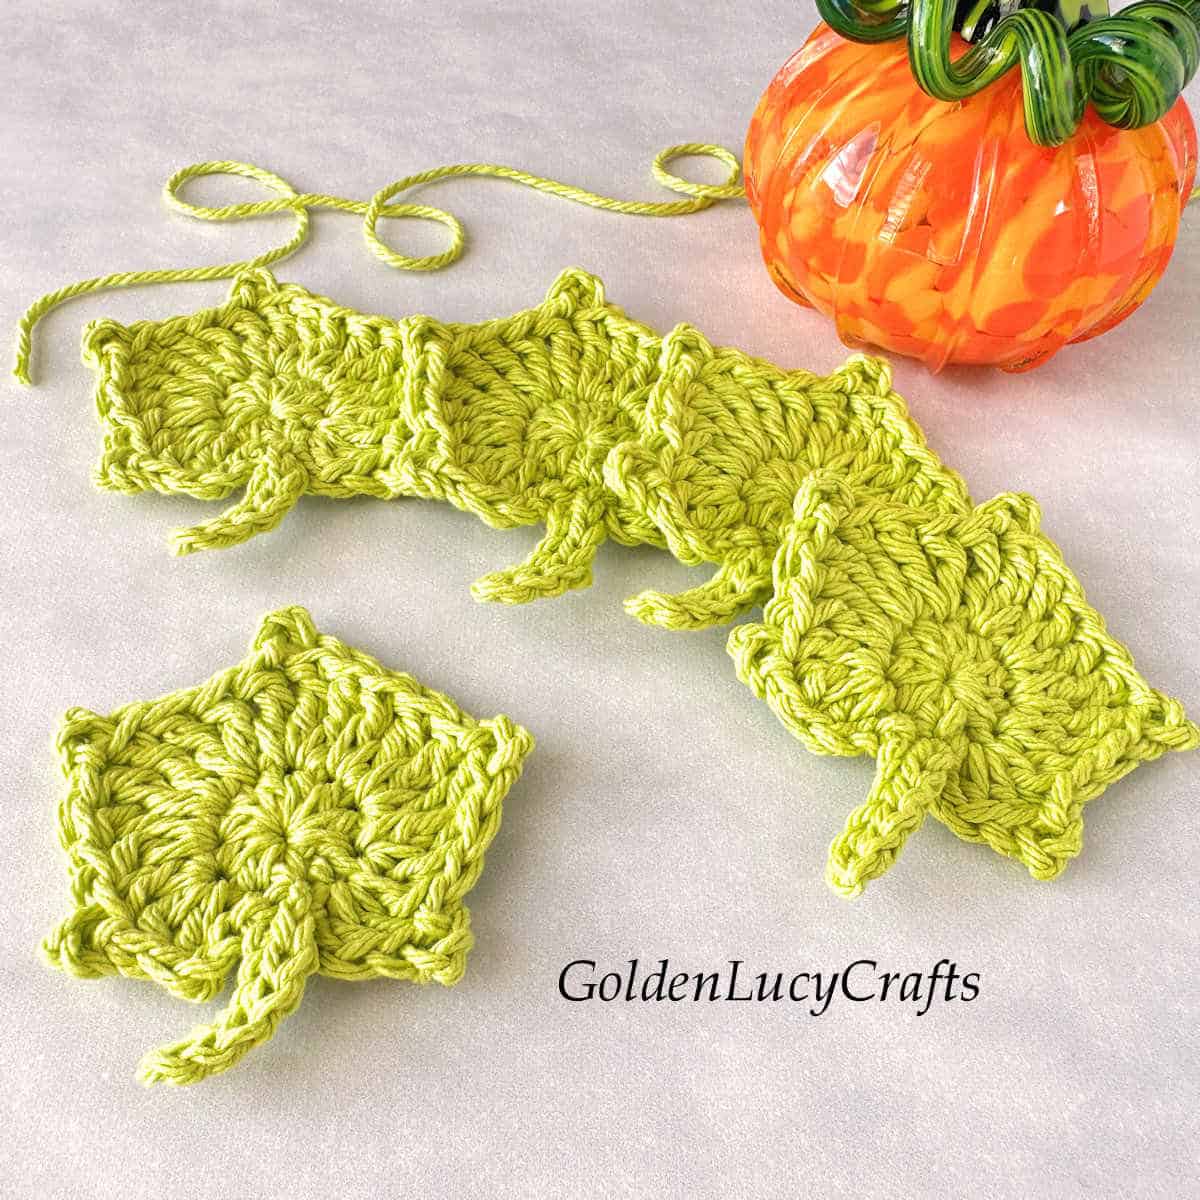 Five crocheted pumpkin leaves laying next to the glass pumpkin.